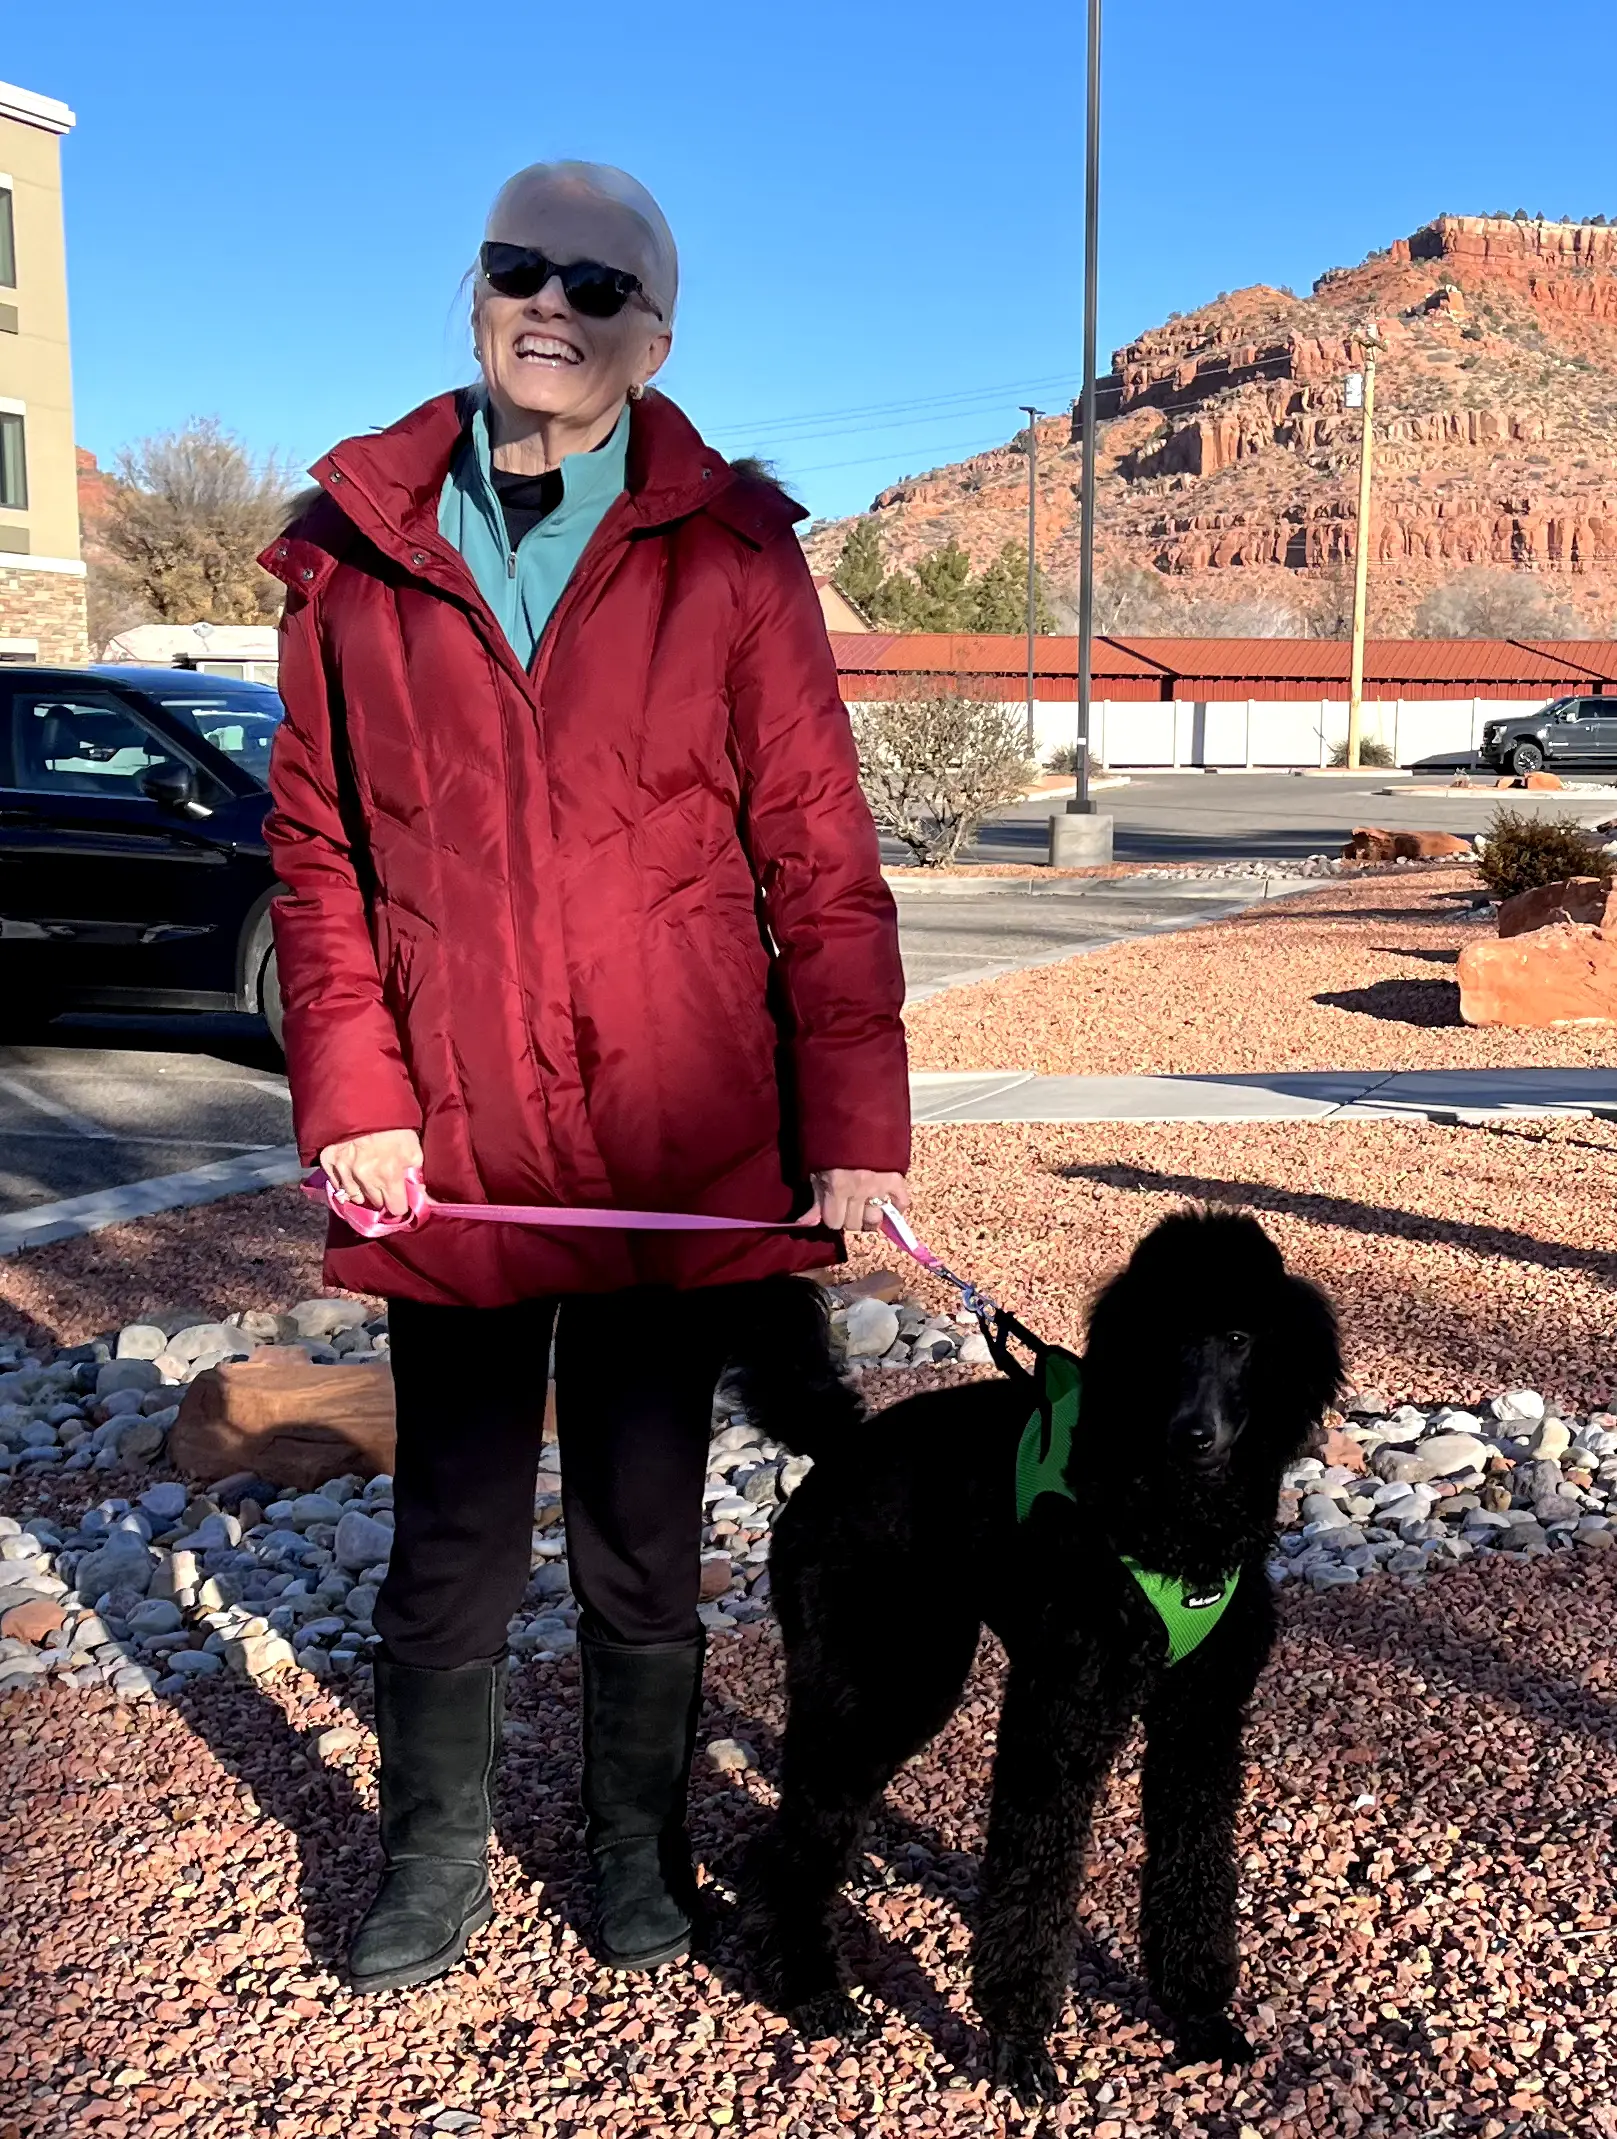 Together, we picked up her new dog, Violet, in Utah and started her journey training her service dog.